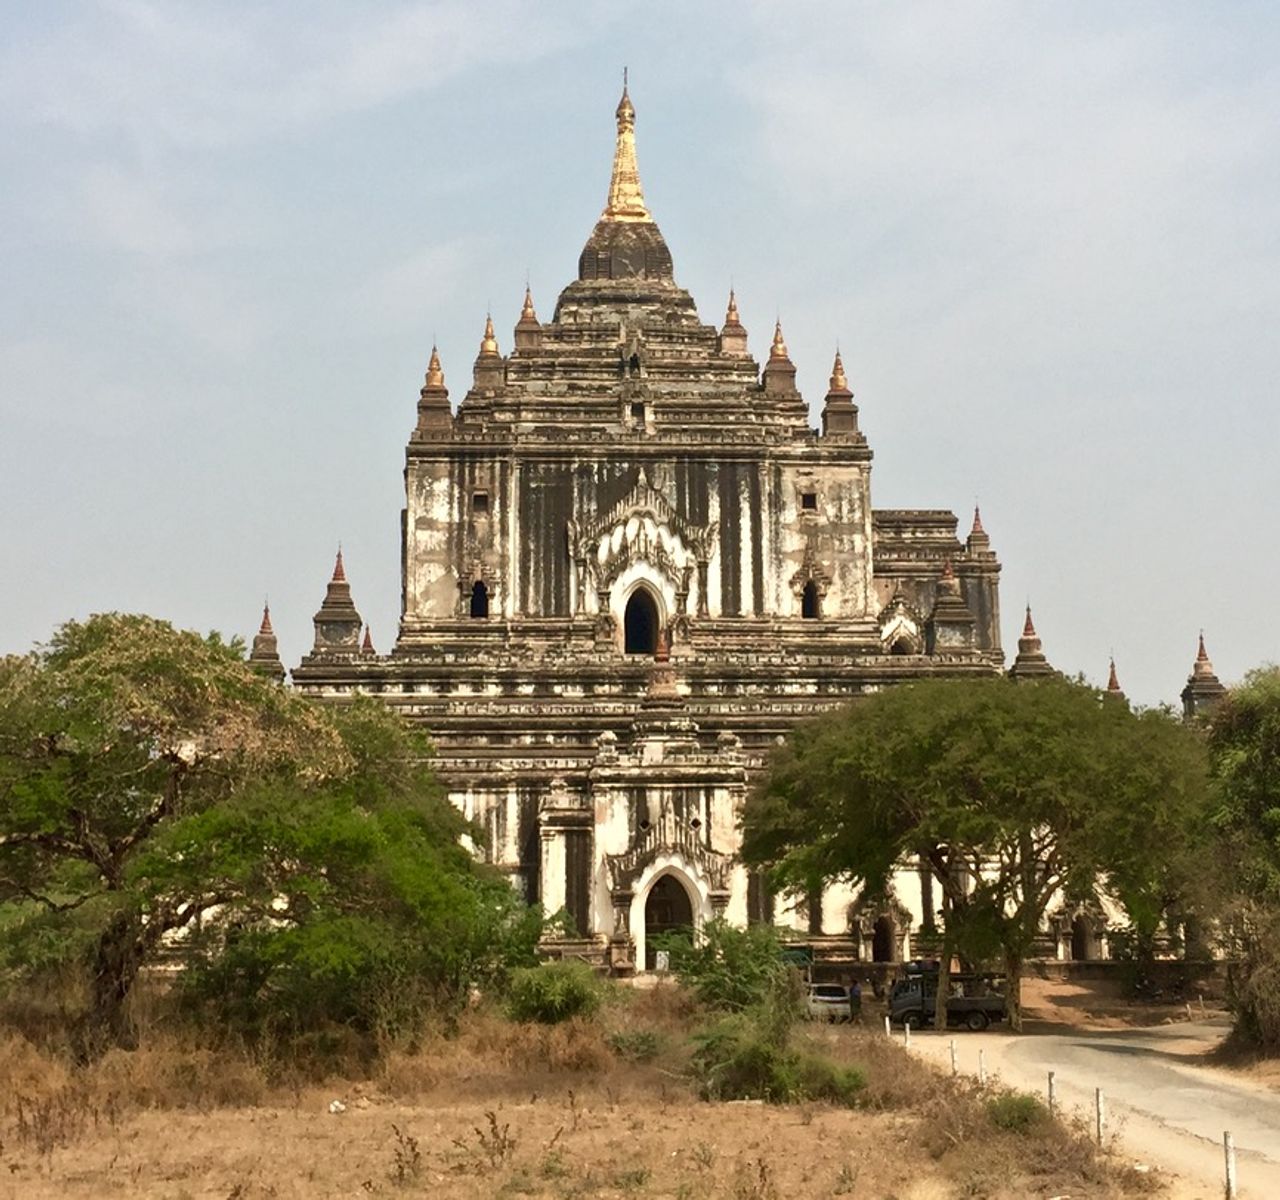 A large white temple as seen from a distance.